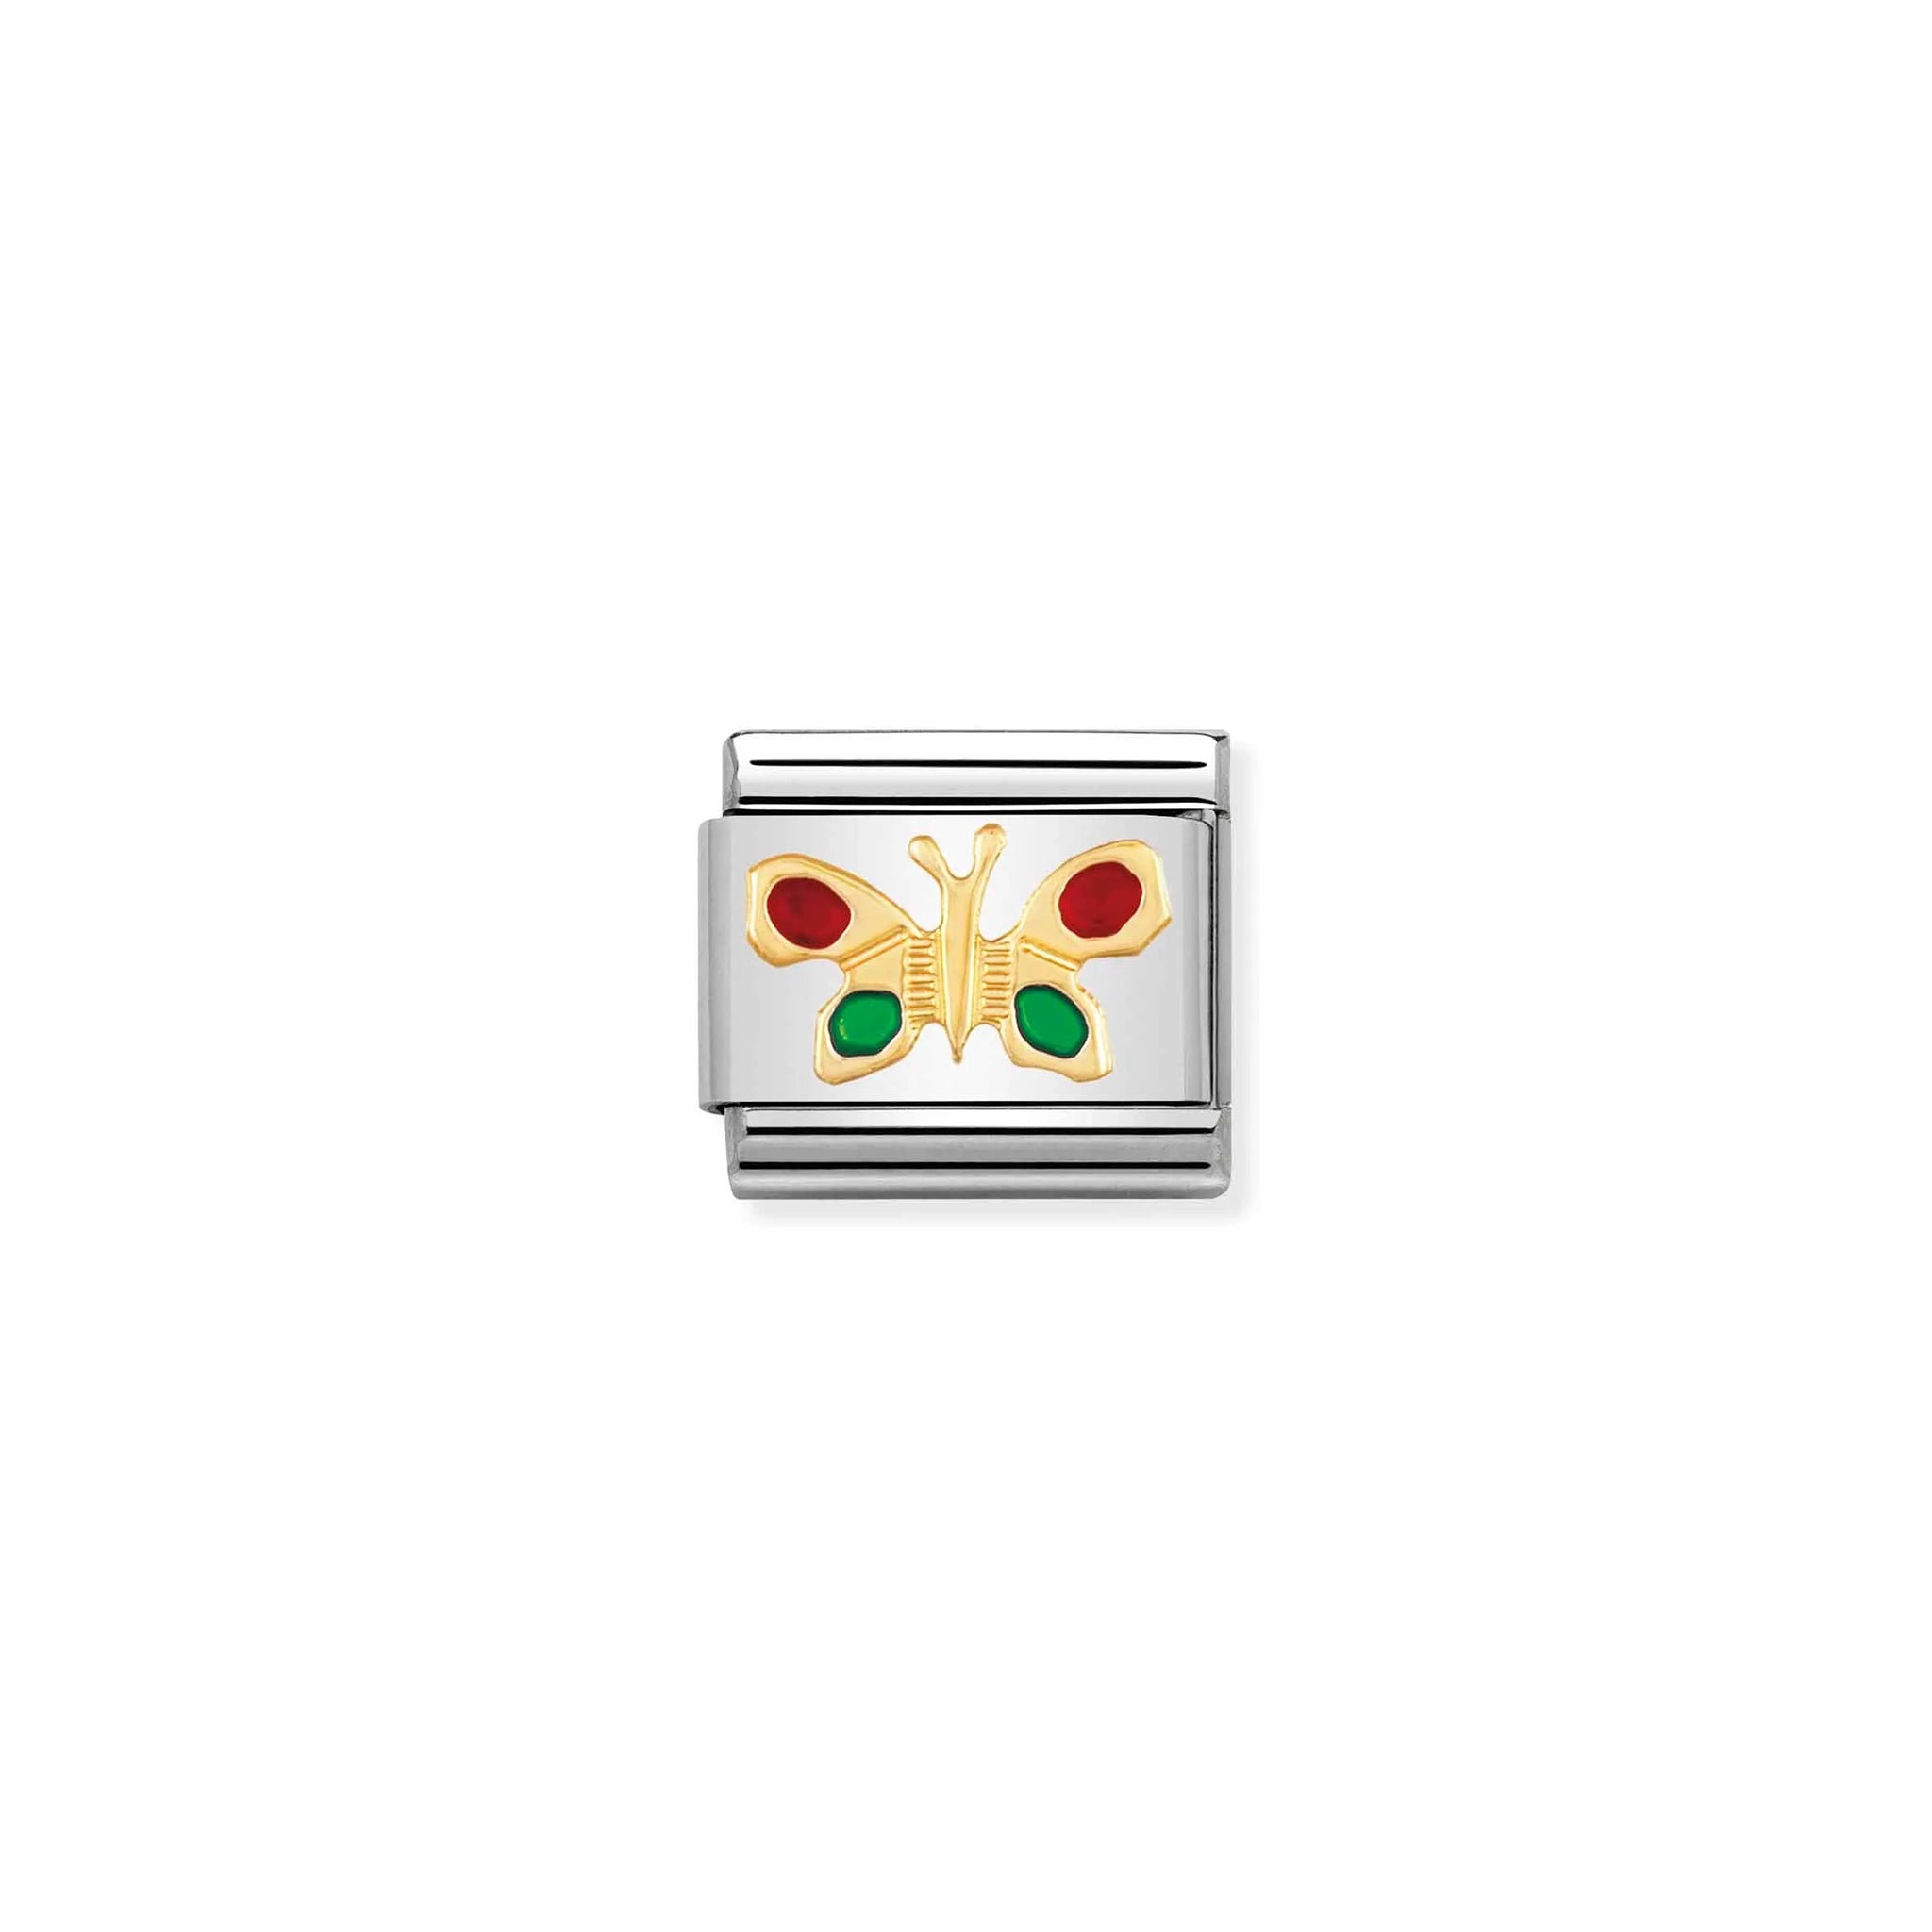 Nomination charm link featuring a gold butterfly with red and green enamel spot wings